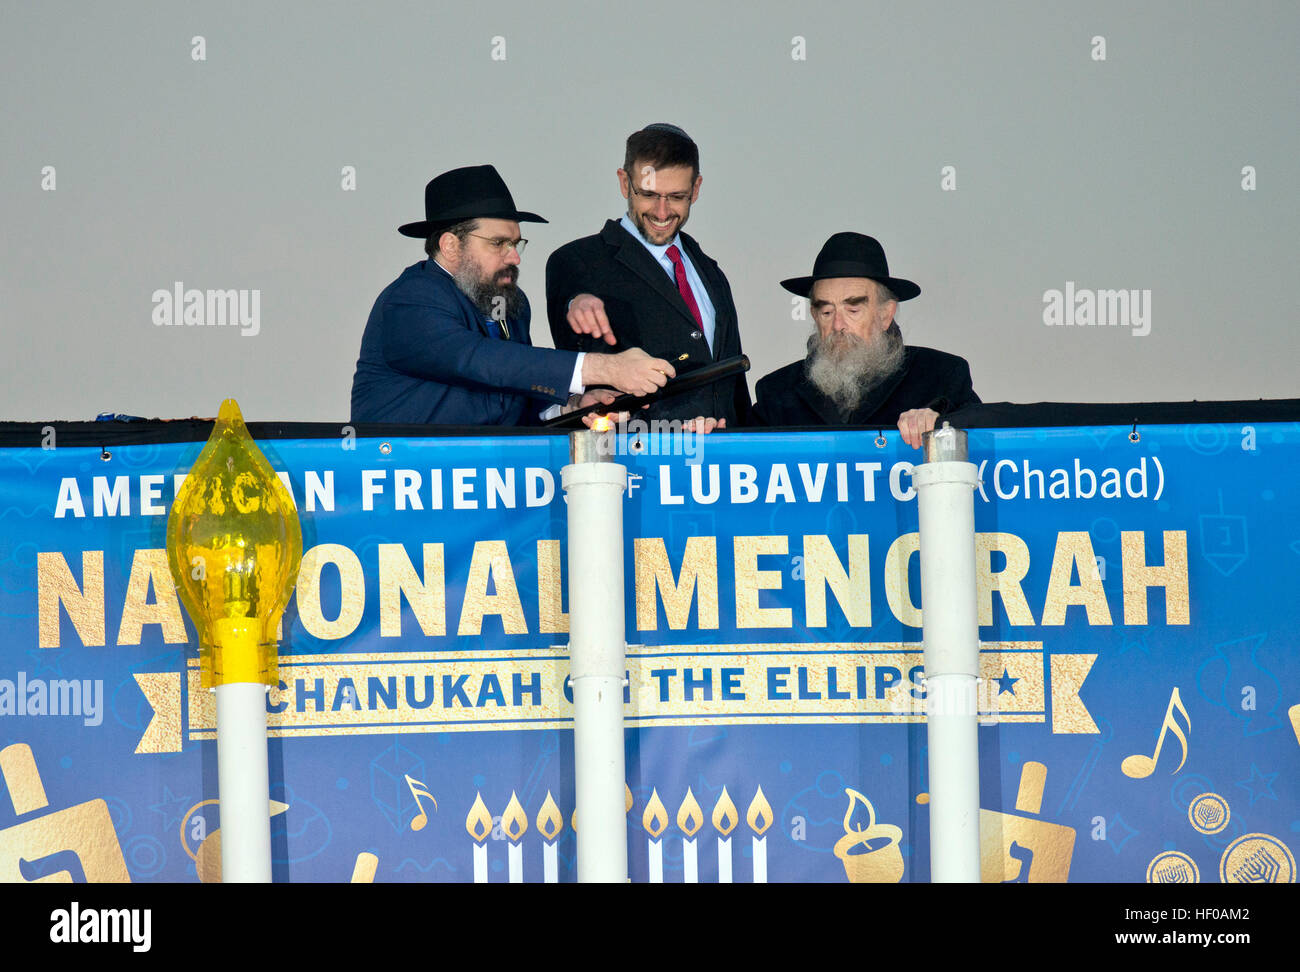 Under Secretary of the Treasury on Countering the Financing of Terrorism Adam Szubin (Acting), center, accompanied by Rabbi Levi Shemtov, Executive Vice President of American Friends of Lubavitch (Chabad), left, and Rabbi Abraham Shemtov, Chairman of the Board of Agudas Chasidei Chabad and founding director of American Friends of Lubavitch (Chabad), right, light the National Menorah on the White House Ellipse in Washington, DC on Sunday, December 25, 2016. Credit: Bill Auth/CNP /MediaPunch Stock Photo